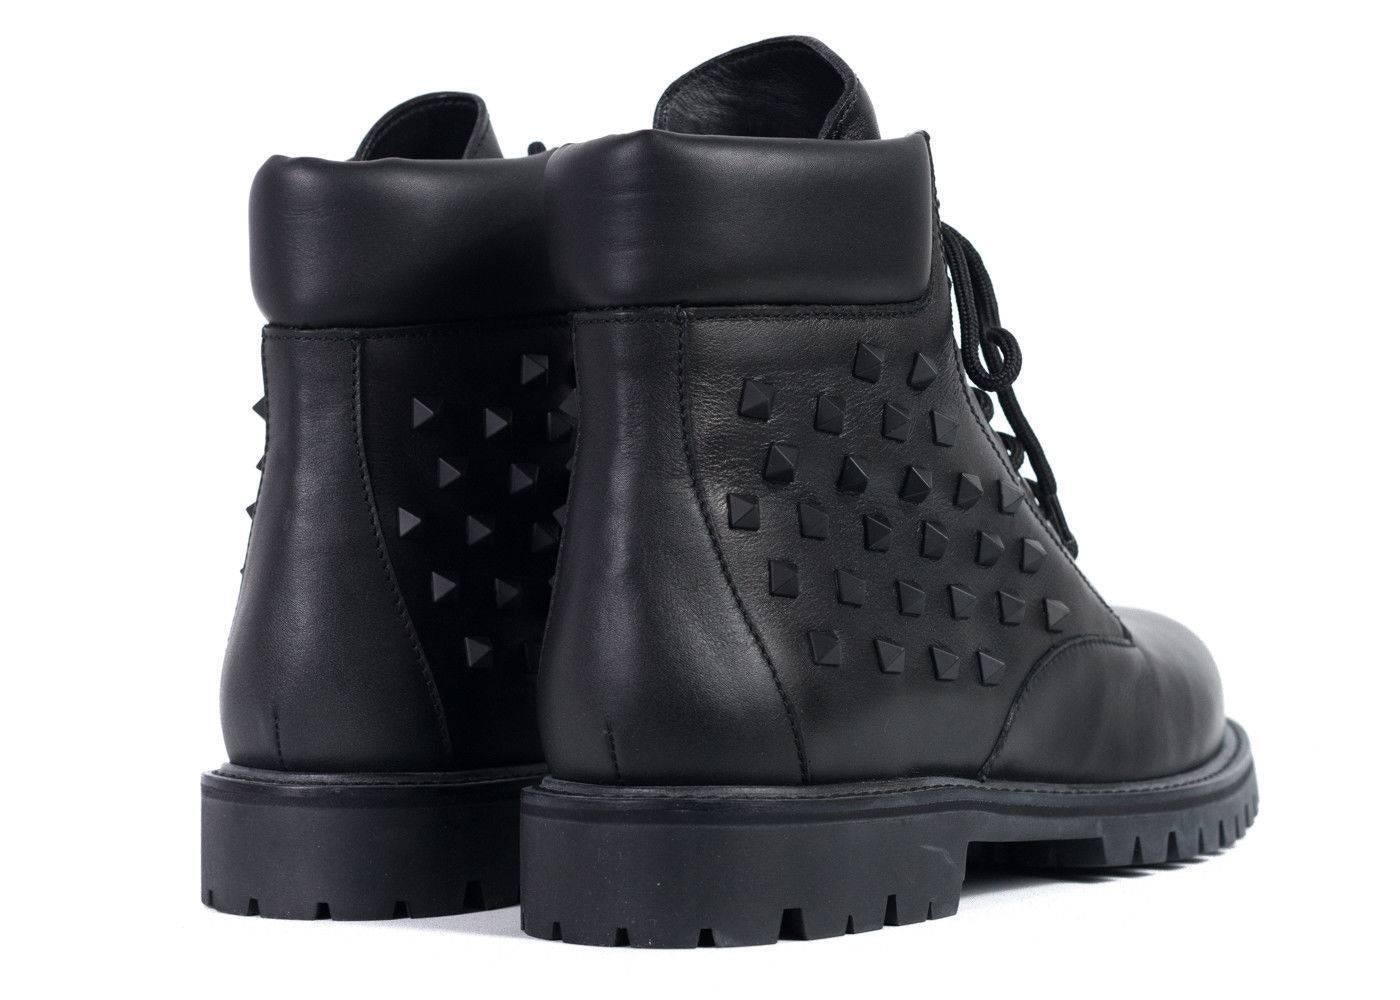 Valentinos rendition of a classic black combat boot with their houses signature rocketed pyramids on the side of the shoes. These combat boots are the perfect pair to have in your shoe collection. Pair it with your favorite black ensemble or regular